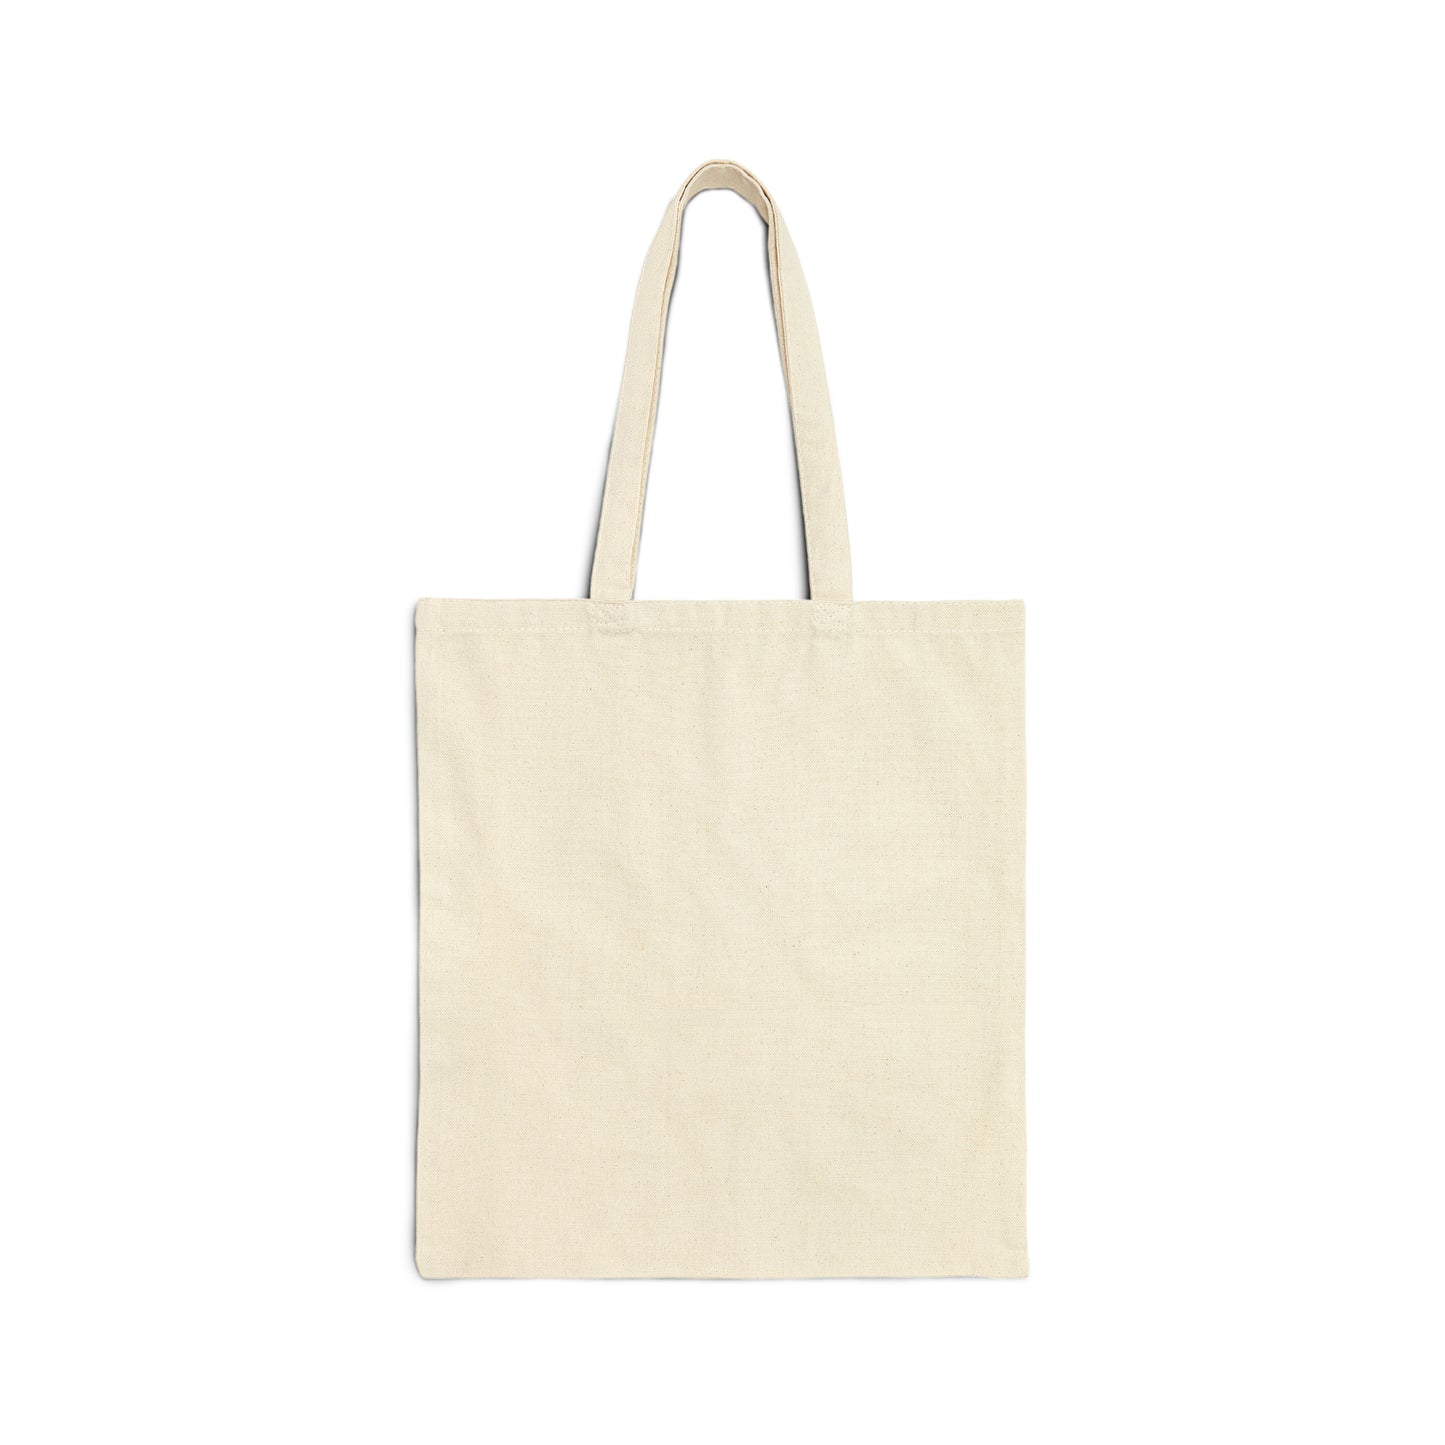 Cotton Canvas Tote Bag: Nasty Troll